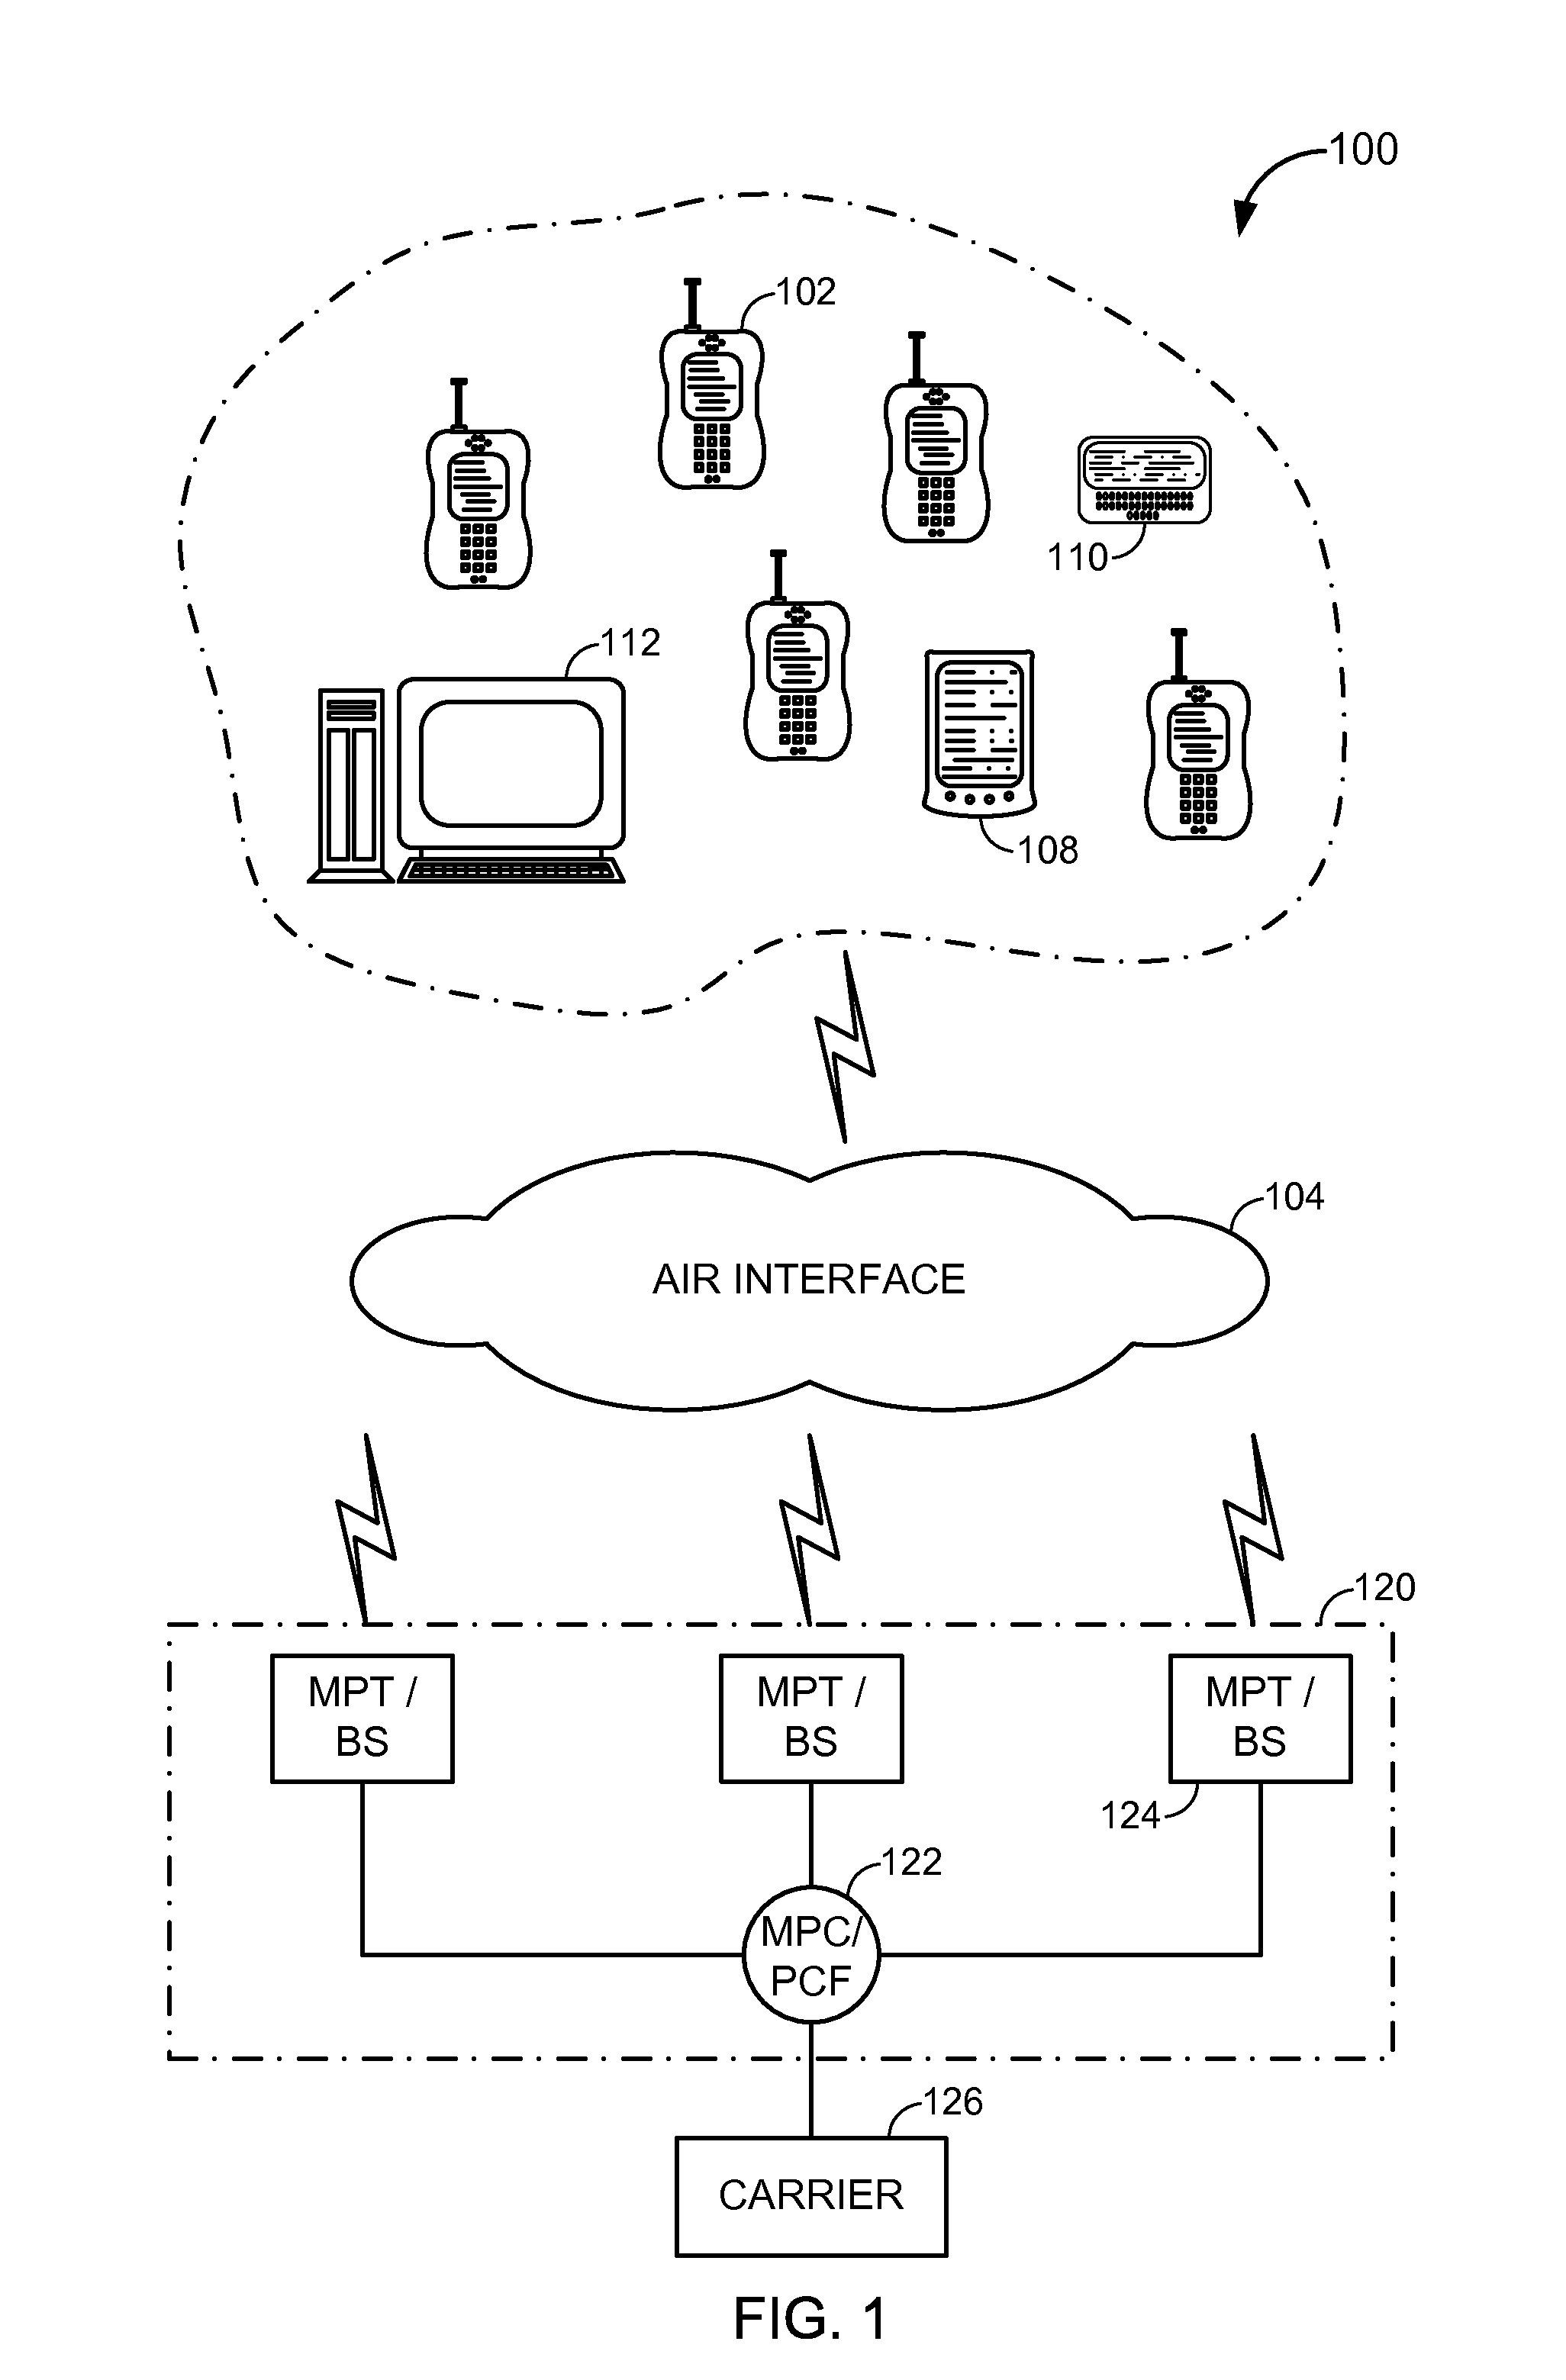 Paging access terminals in a wireless communications system